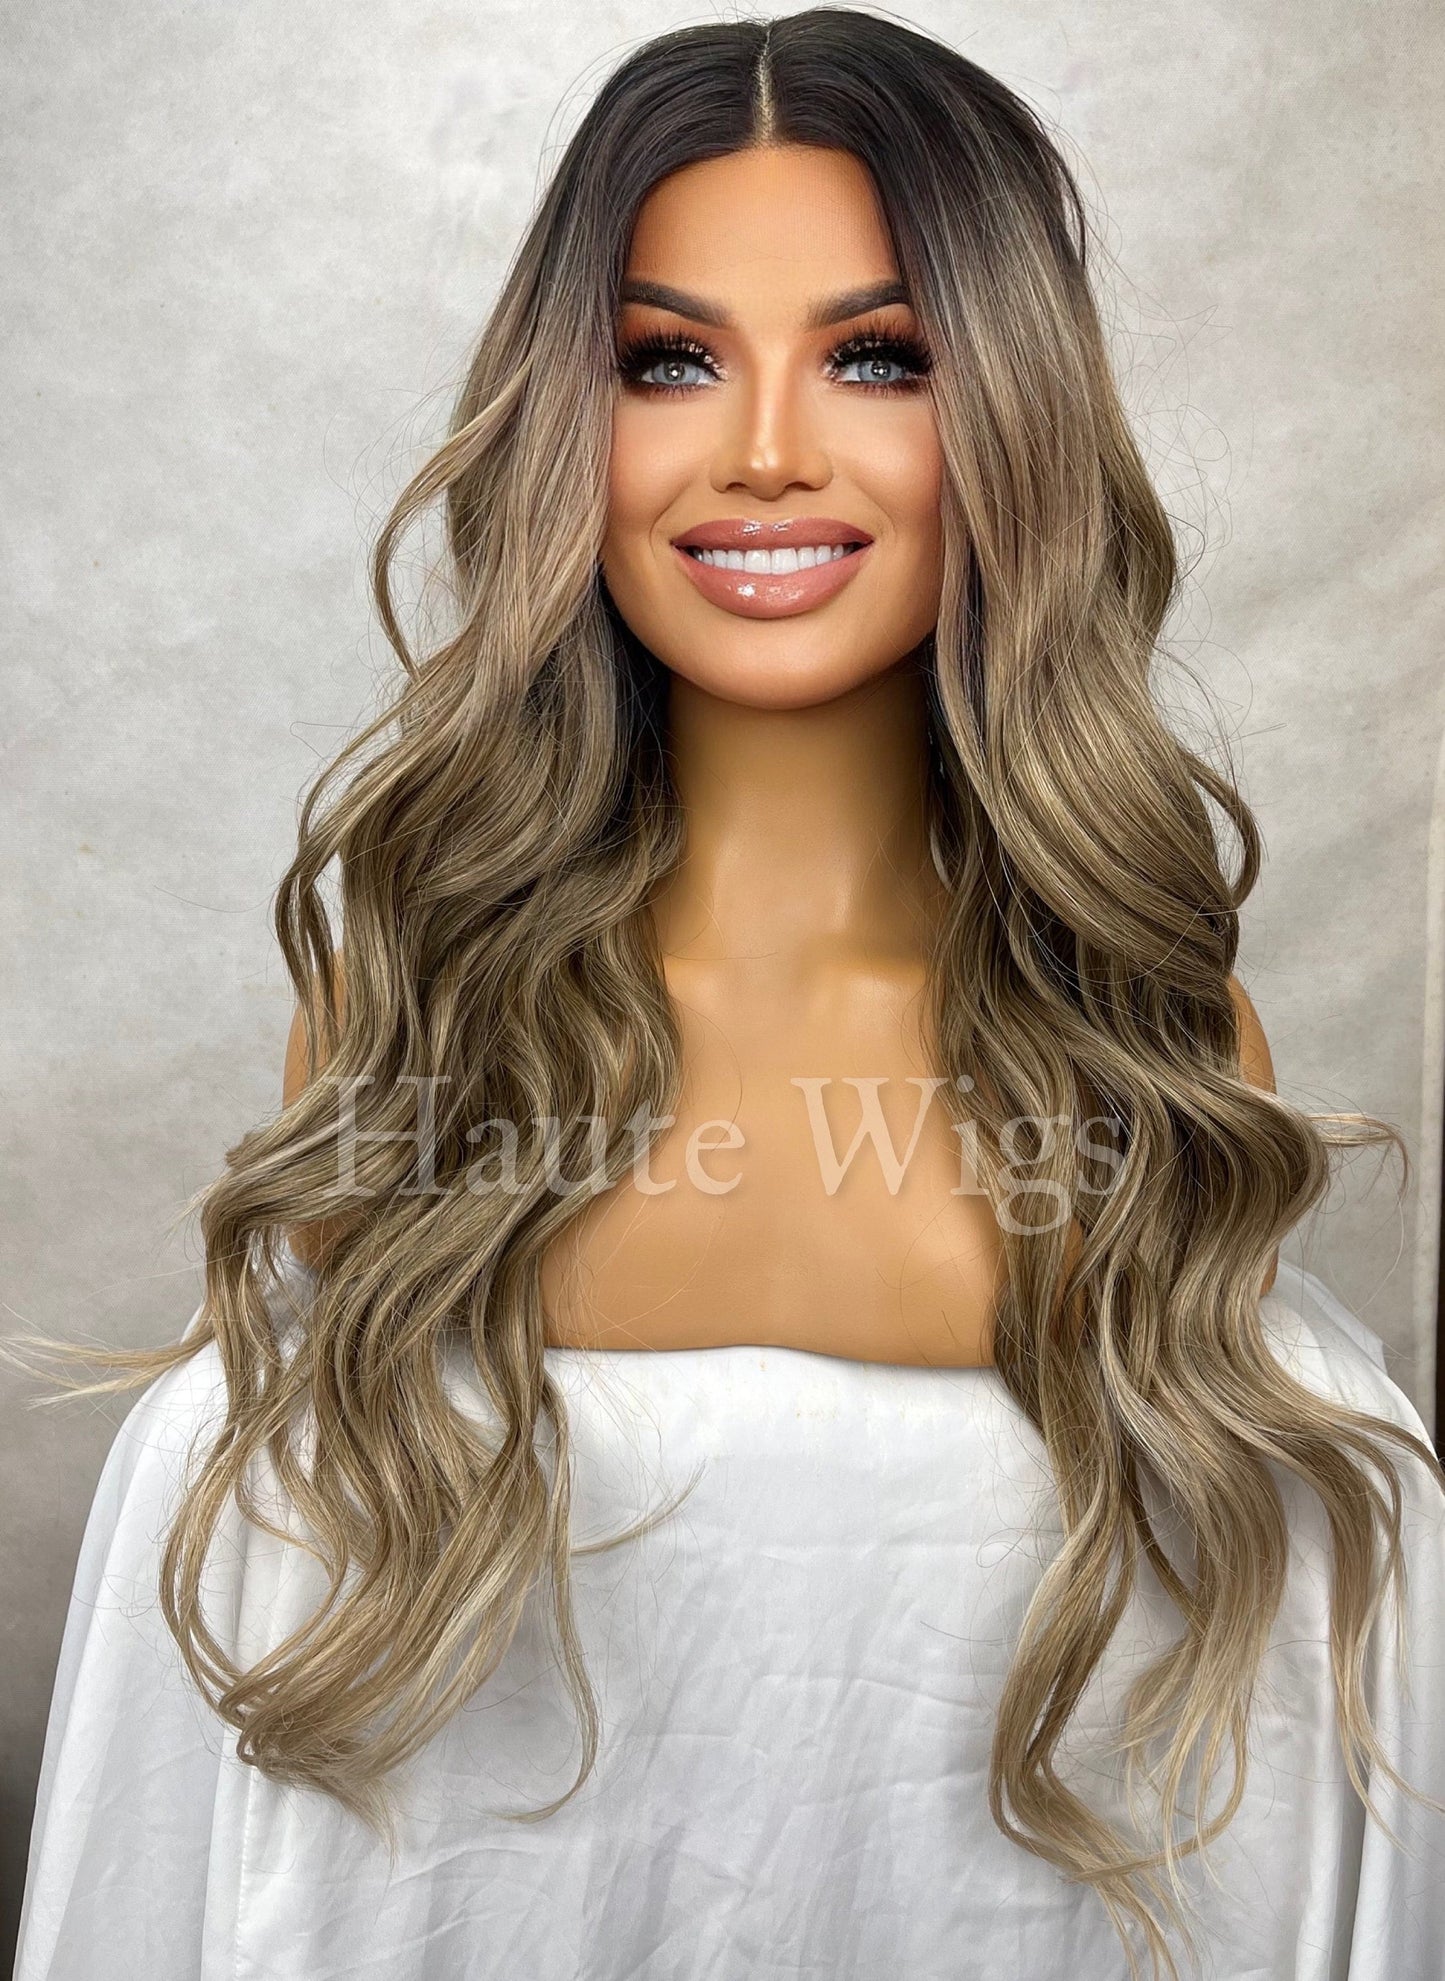 Dirty Diana - Ash Blonde Wig 28 Inch Long Womens Wigs Brown mushroom Silver Highlights Wavy Lace Front Human Hair Blends Amazing